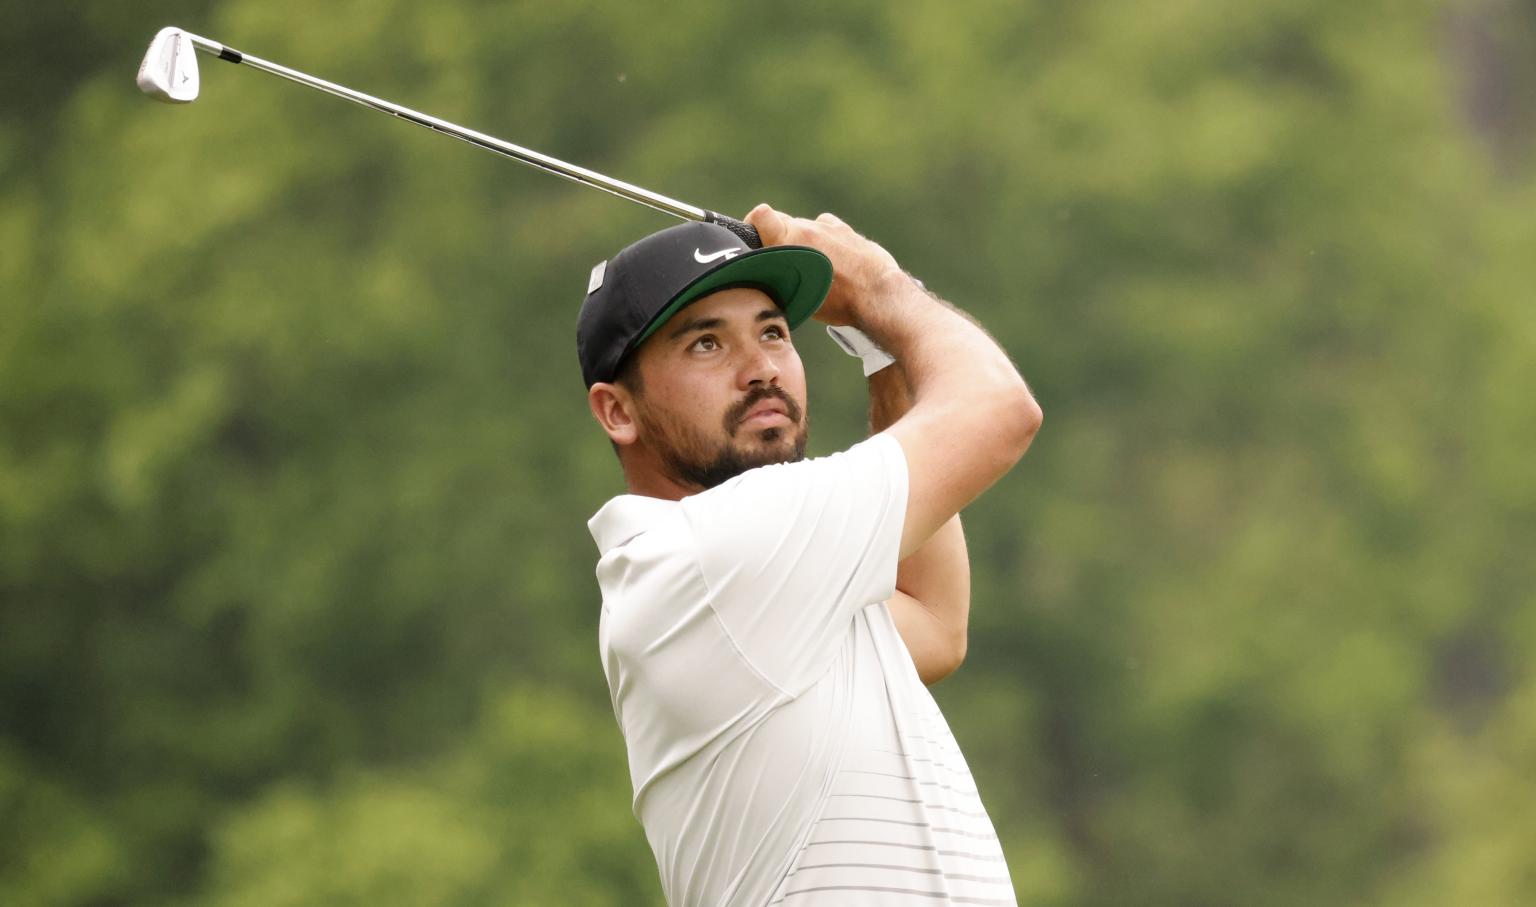 Former World No. 1 Jason Day SPOTTED using a new putter | GolfMagic